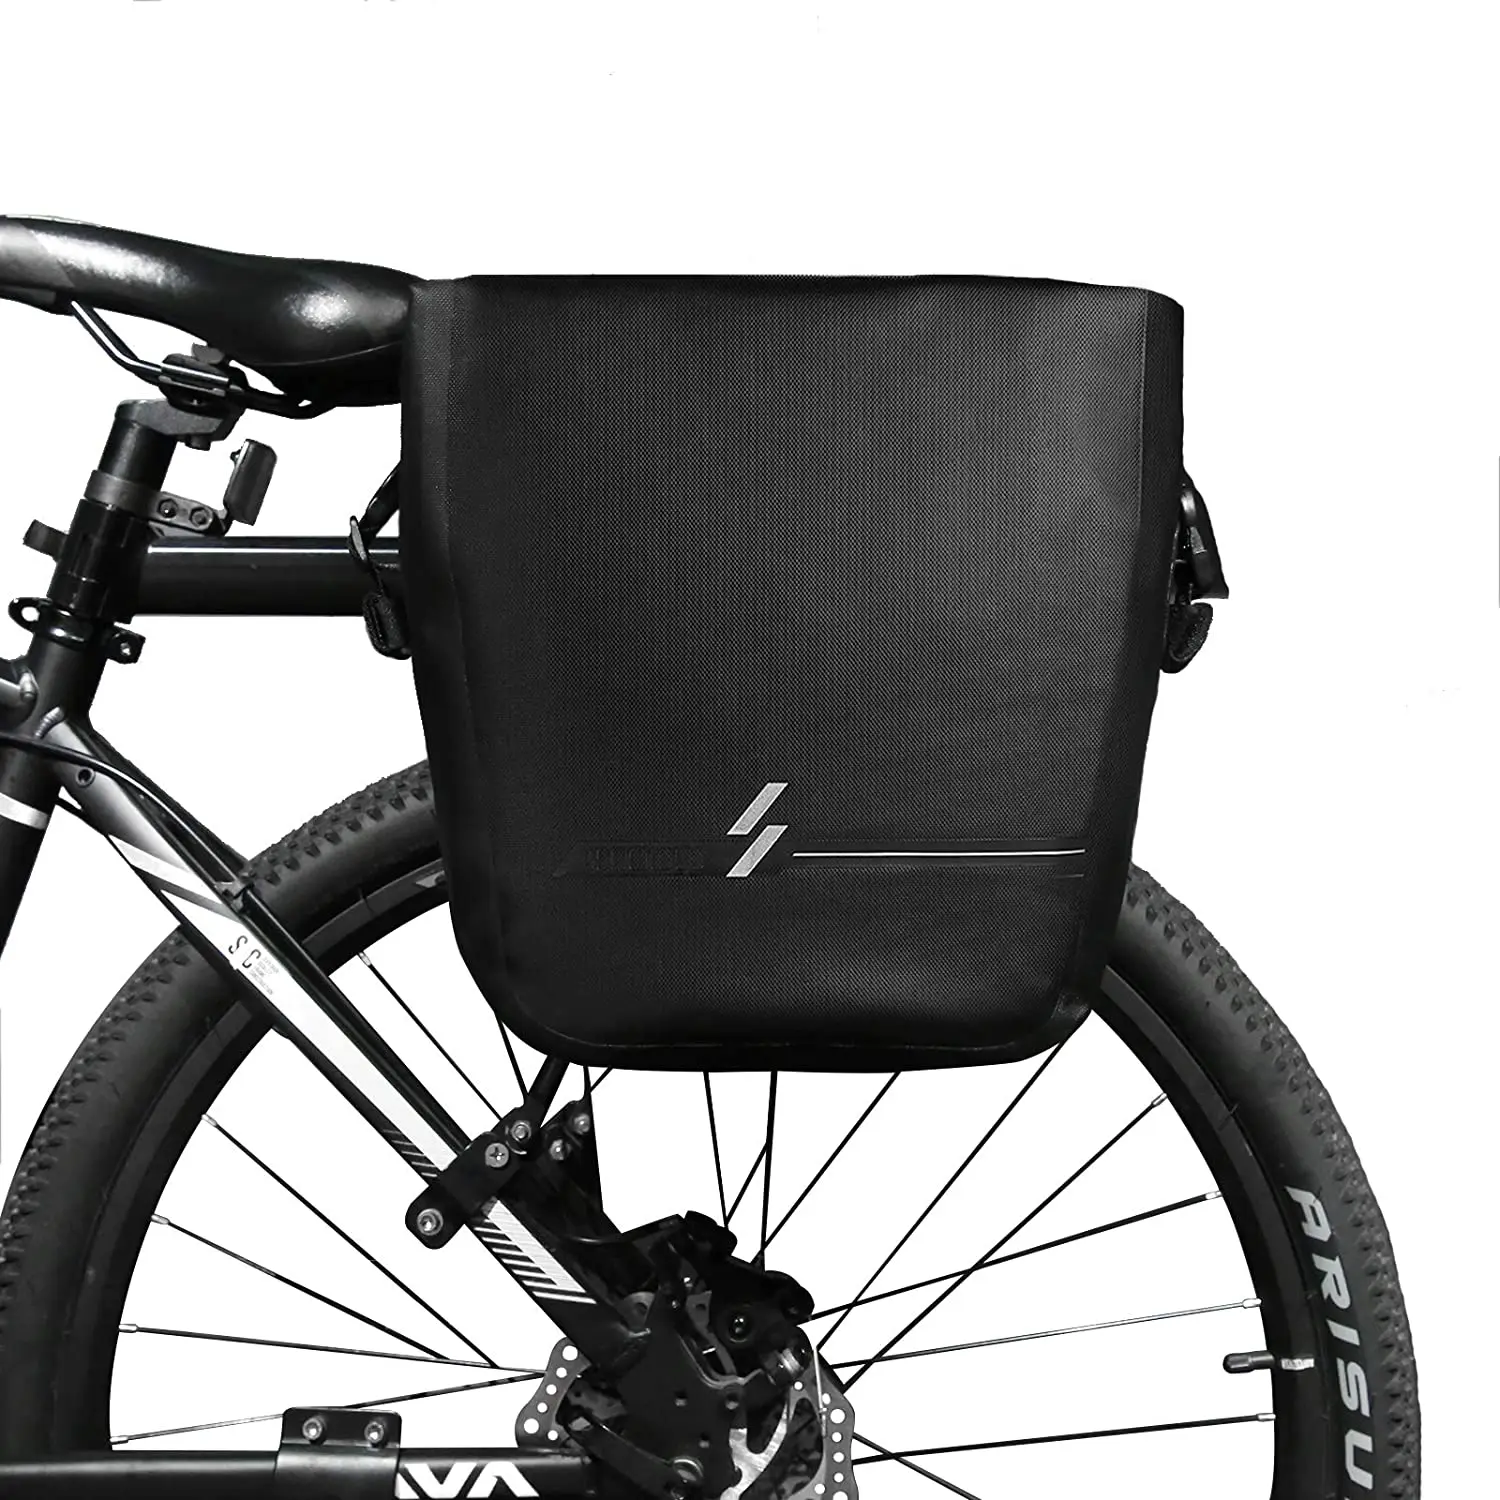 

Heavy Rainproof Durable Cycling Bike Front Roller Pannier Bag Front Rack Travel Bicycle Saddle Rear Bag for Touring Commuting, Black